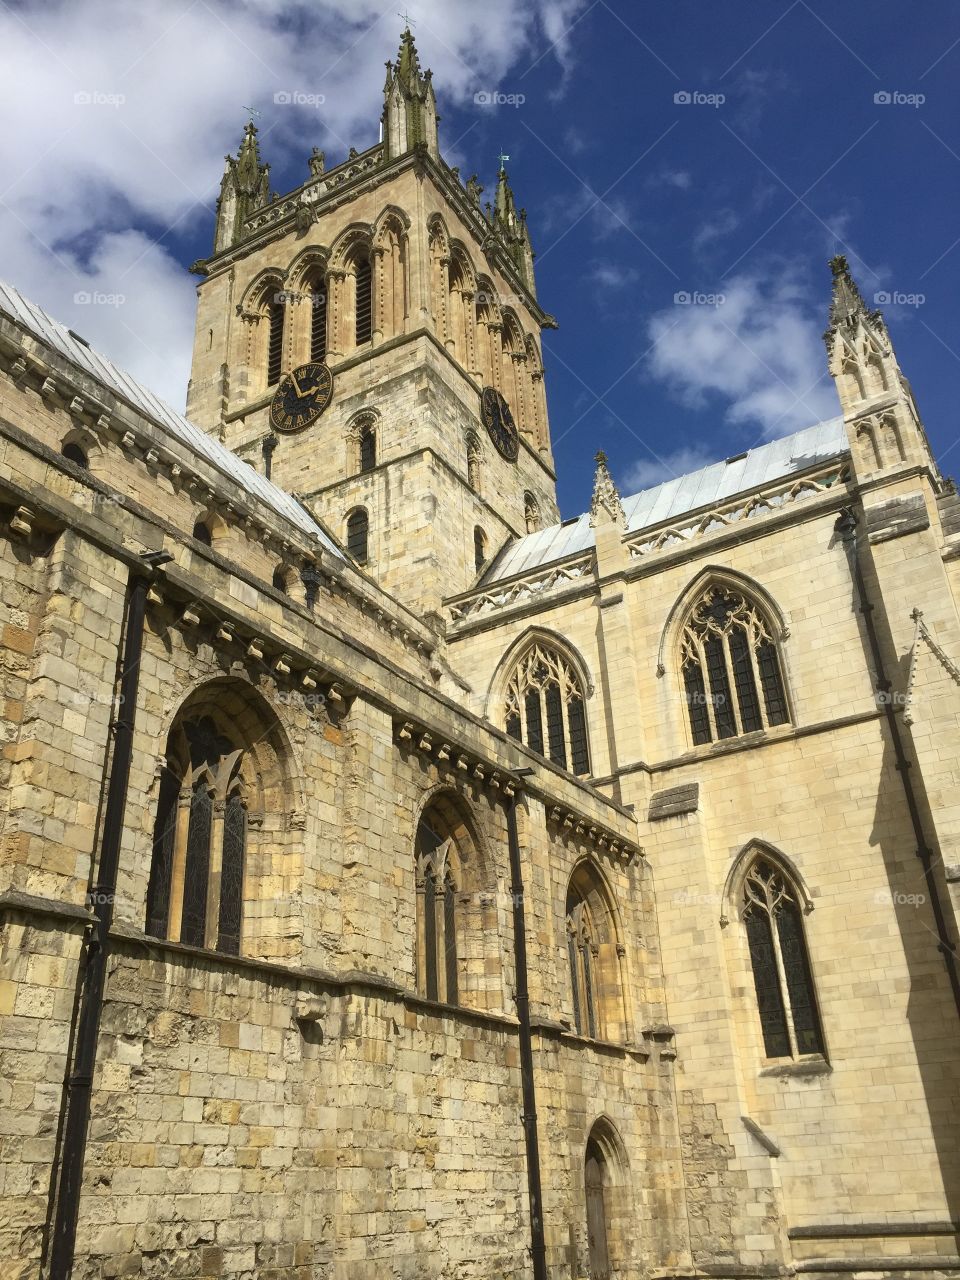 The beautiful medieval building of Selby Abbey in Yorkshire, United Kingdom